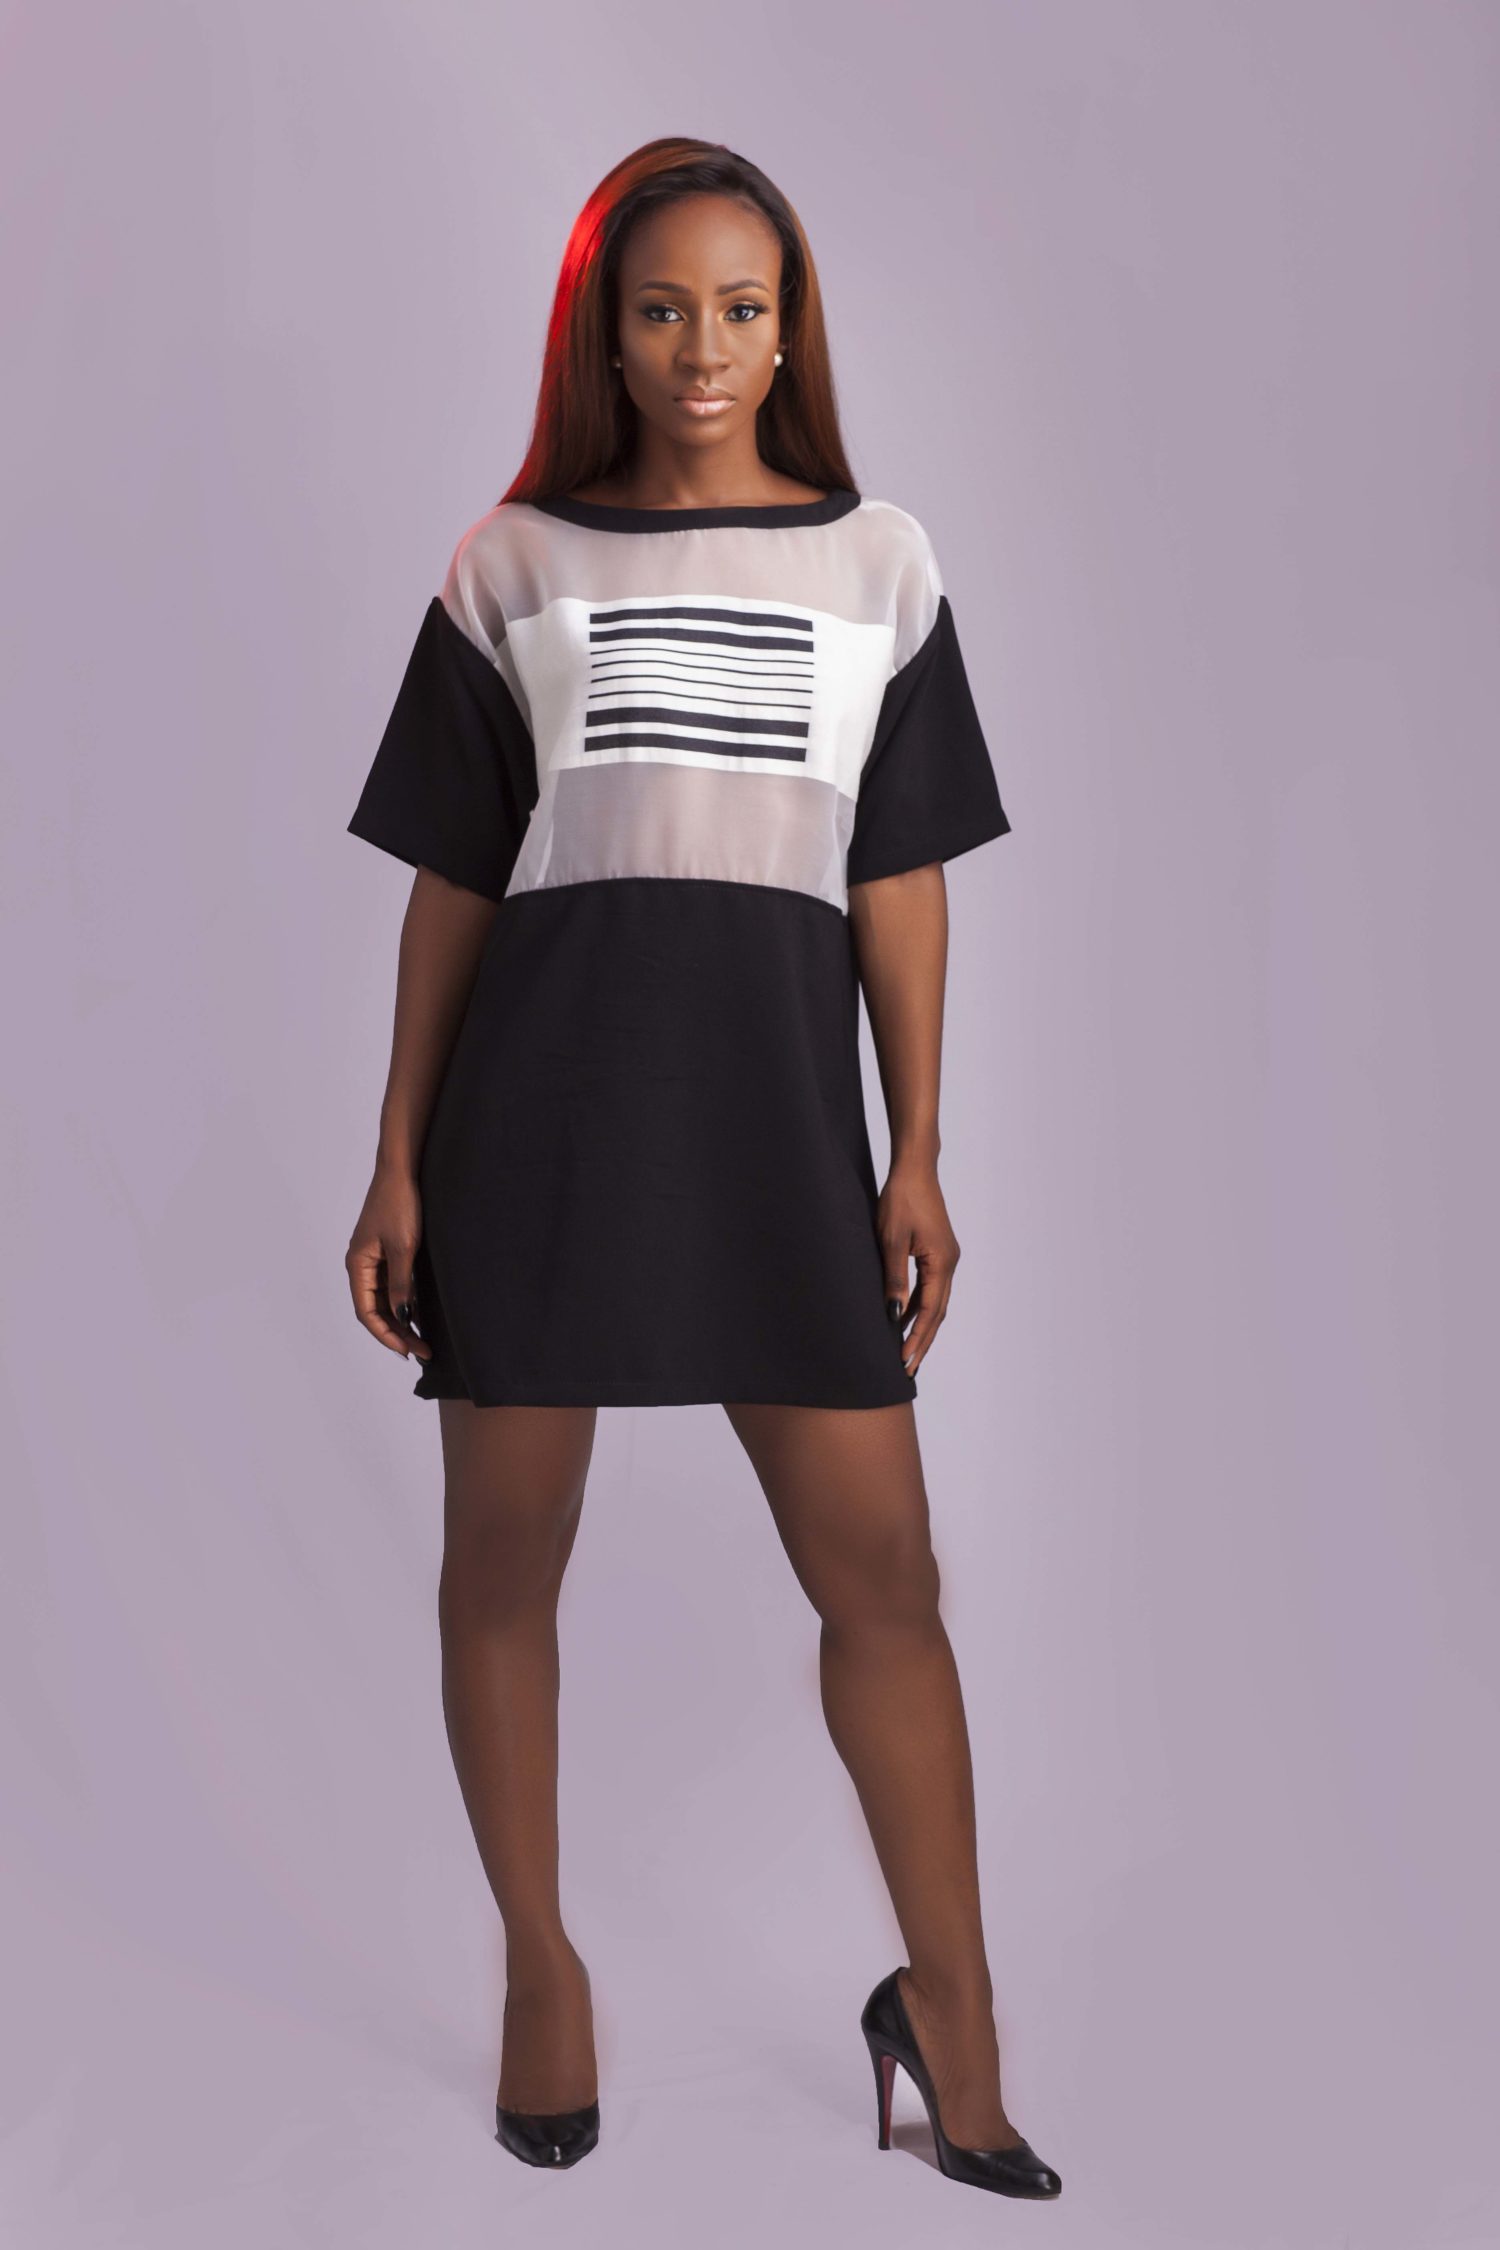 Big Brother Naija Star Anto Lecky Works It In Ayaba Woman’s New Collection